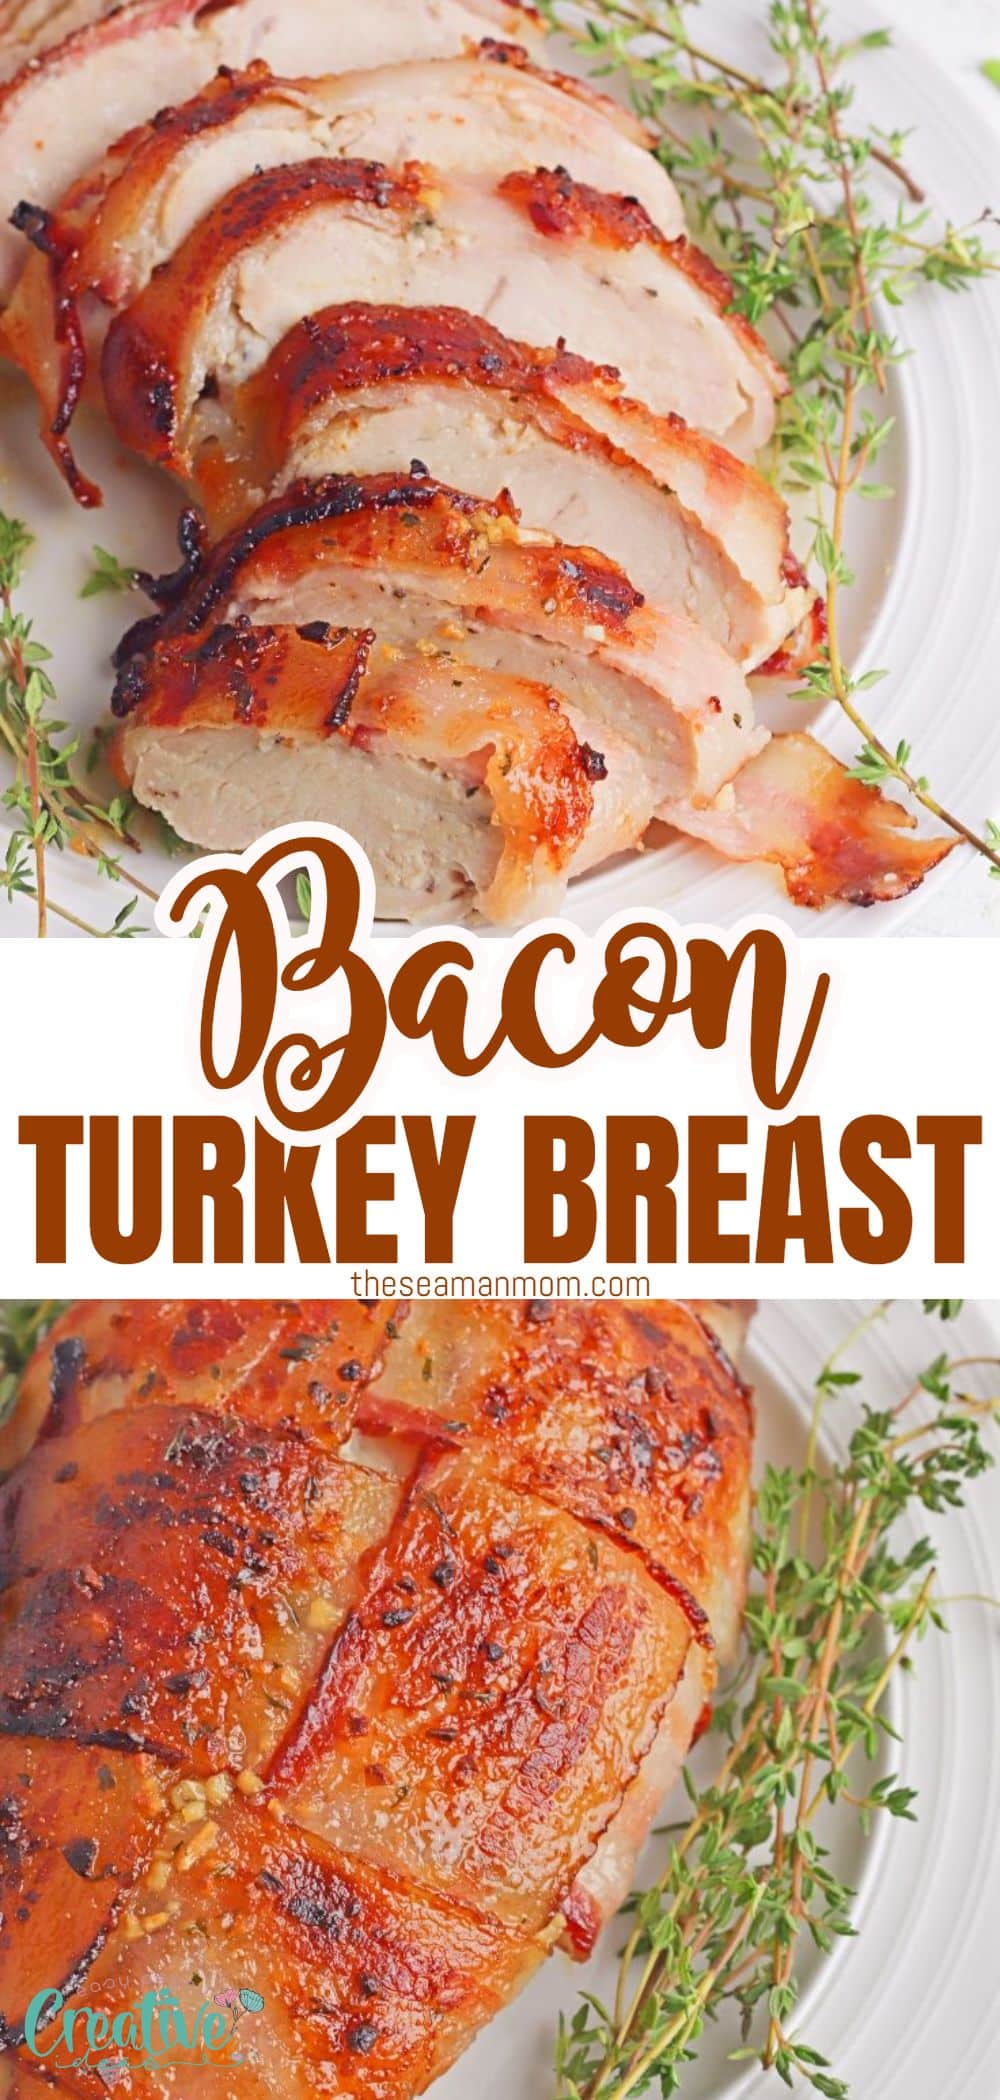 You've got to try this fabulous bacon wrapped turkey breast! A lip-smacking crowd-pleaser recipe, perfect for your Thanksgiving dinner, this bacon wrapped turkey recipe works best if you don't host a big party! via @petroneagu